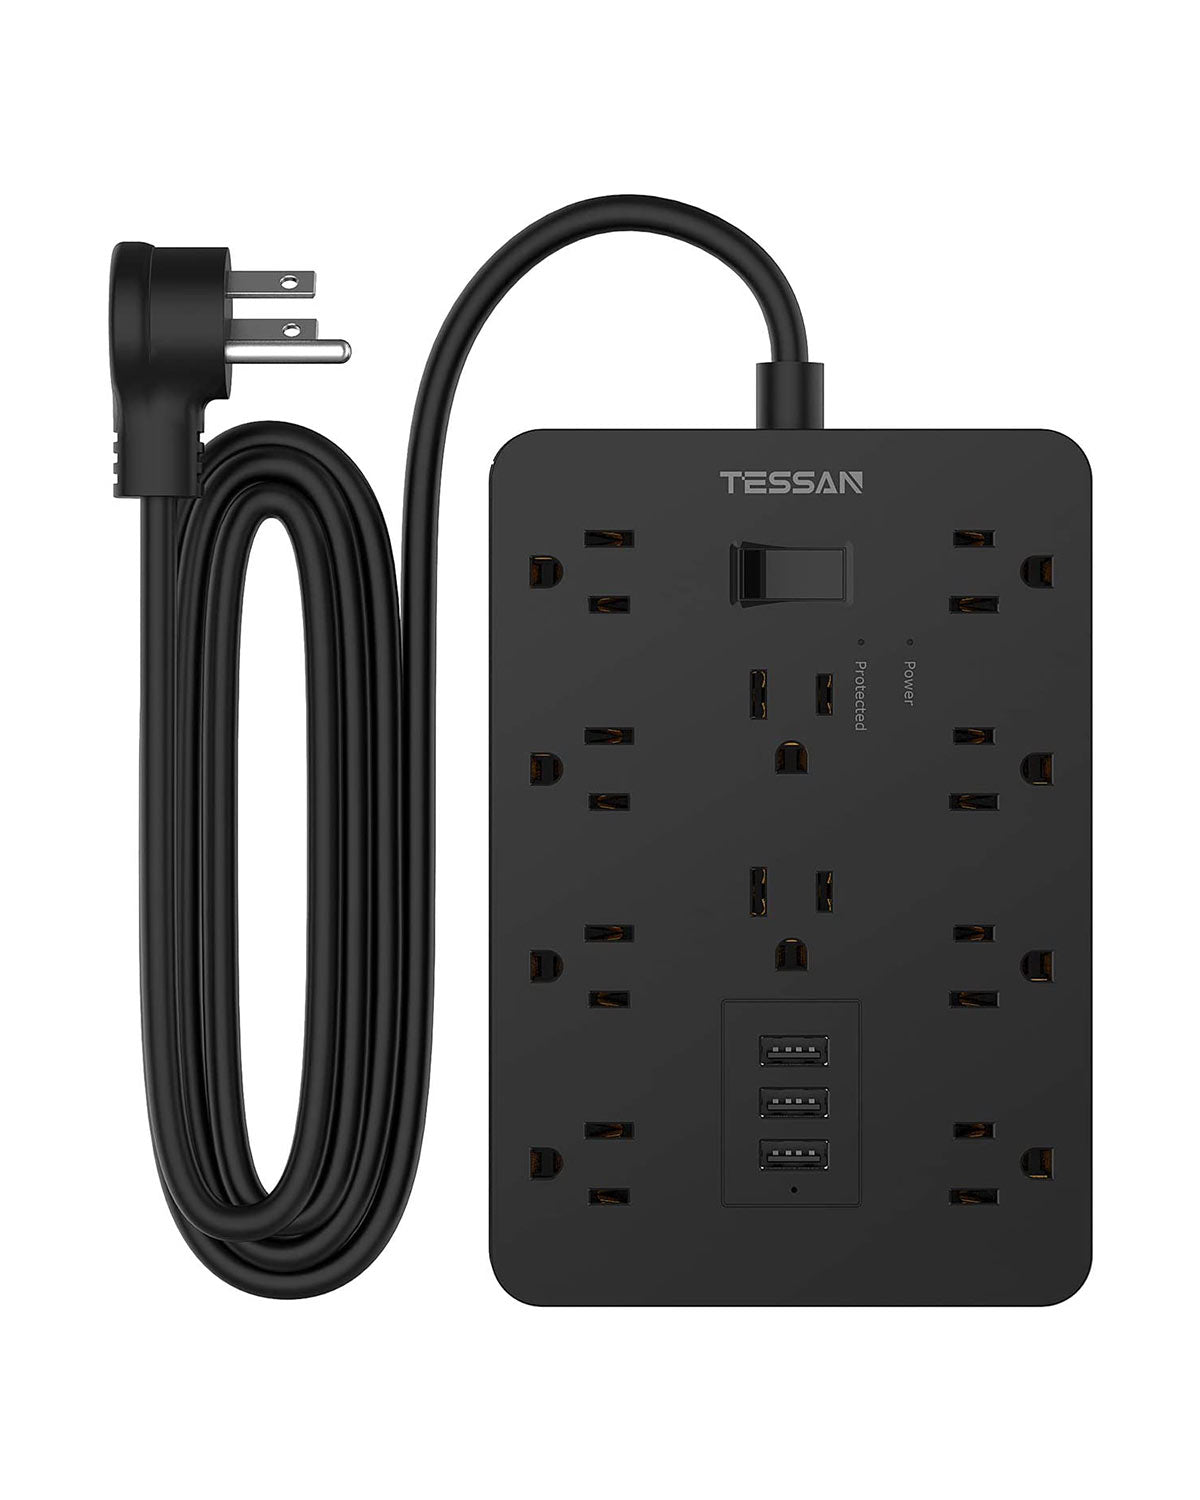 TESSAN Flat Plug Power Strip with 10 Widely Spaced AC Outlets and 3 Charging Ports